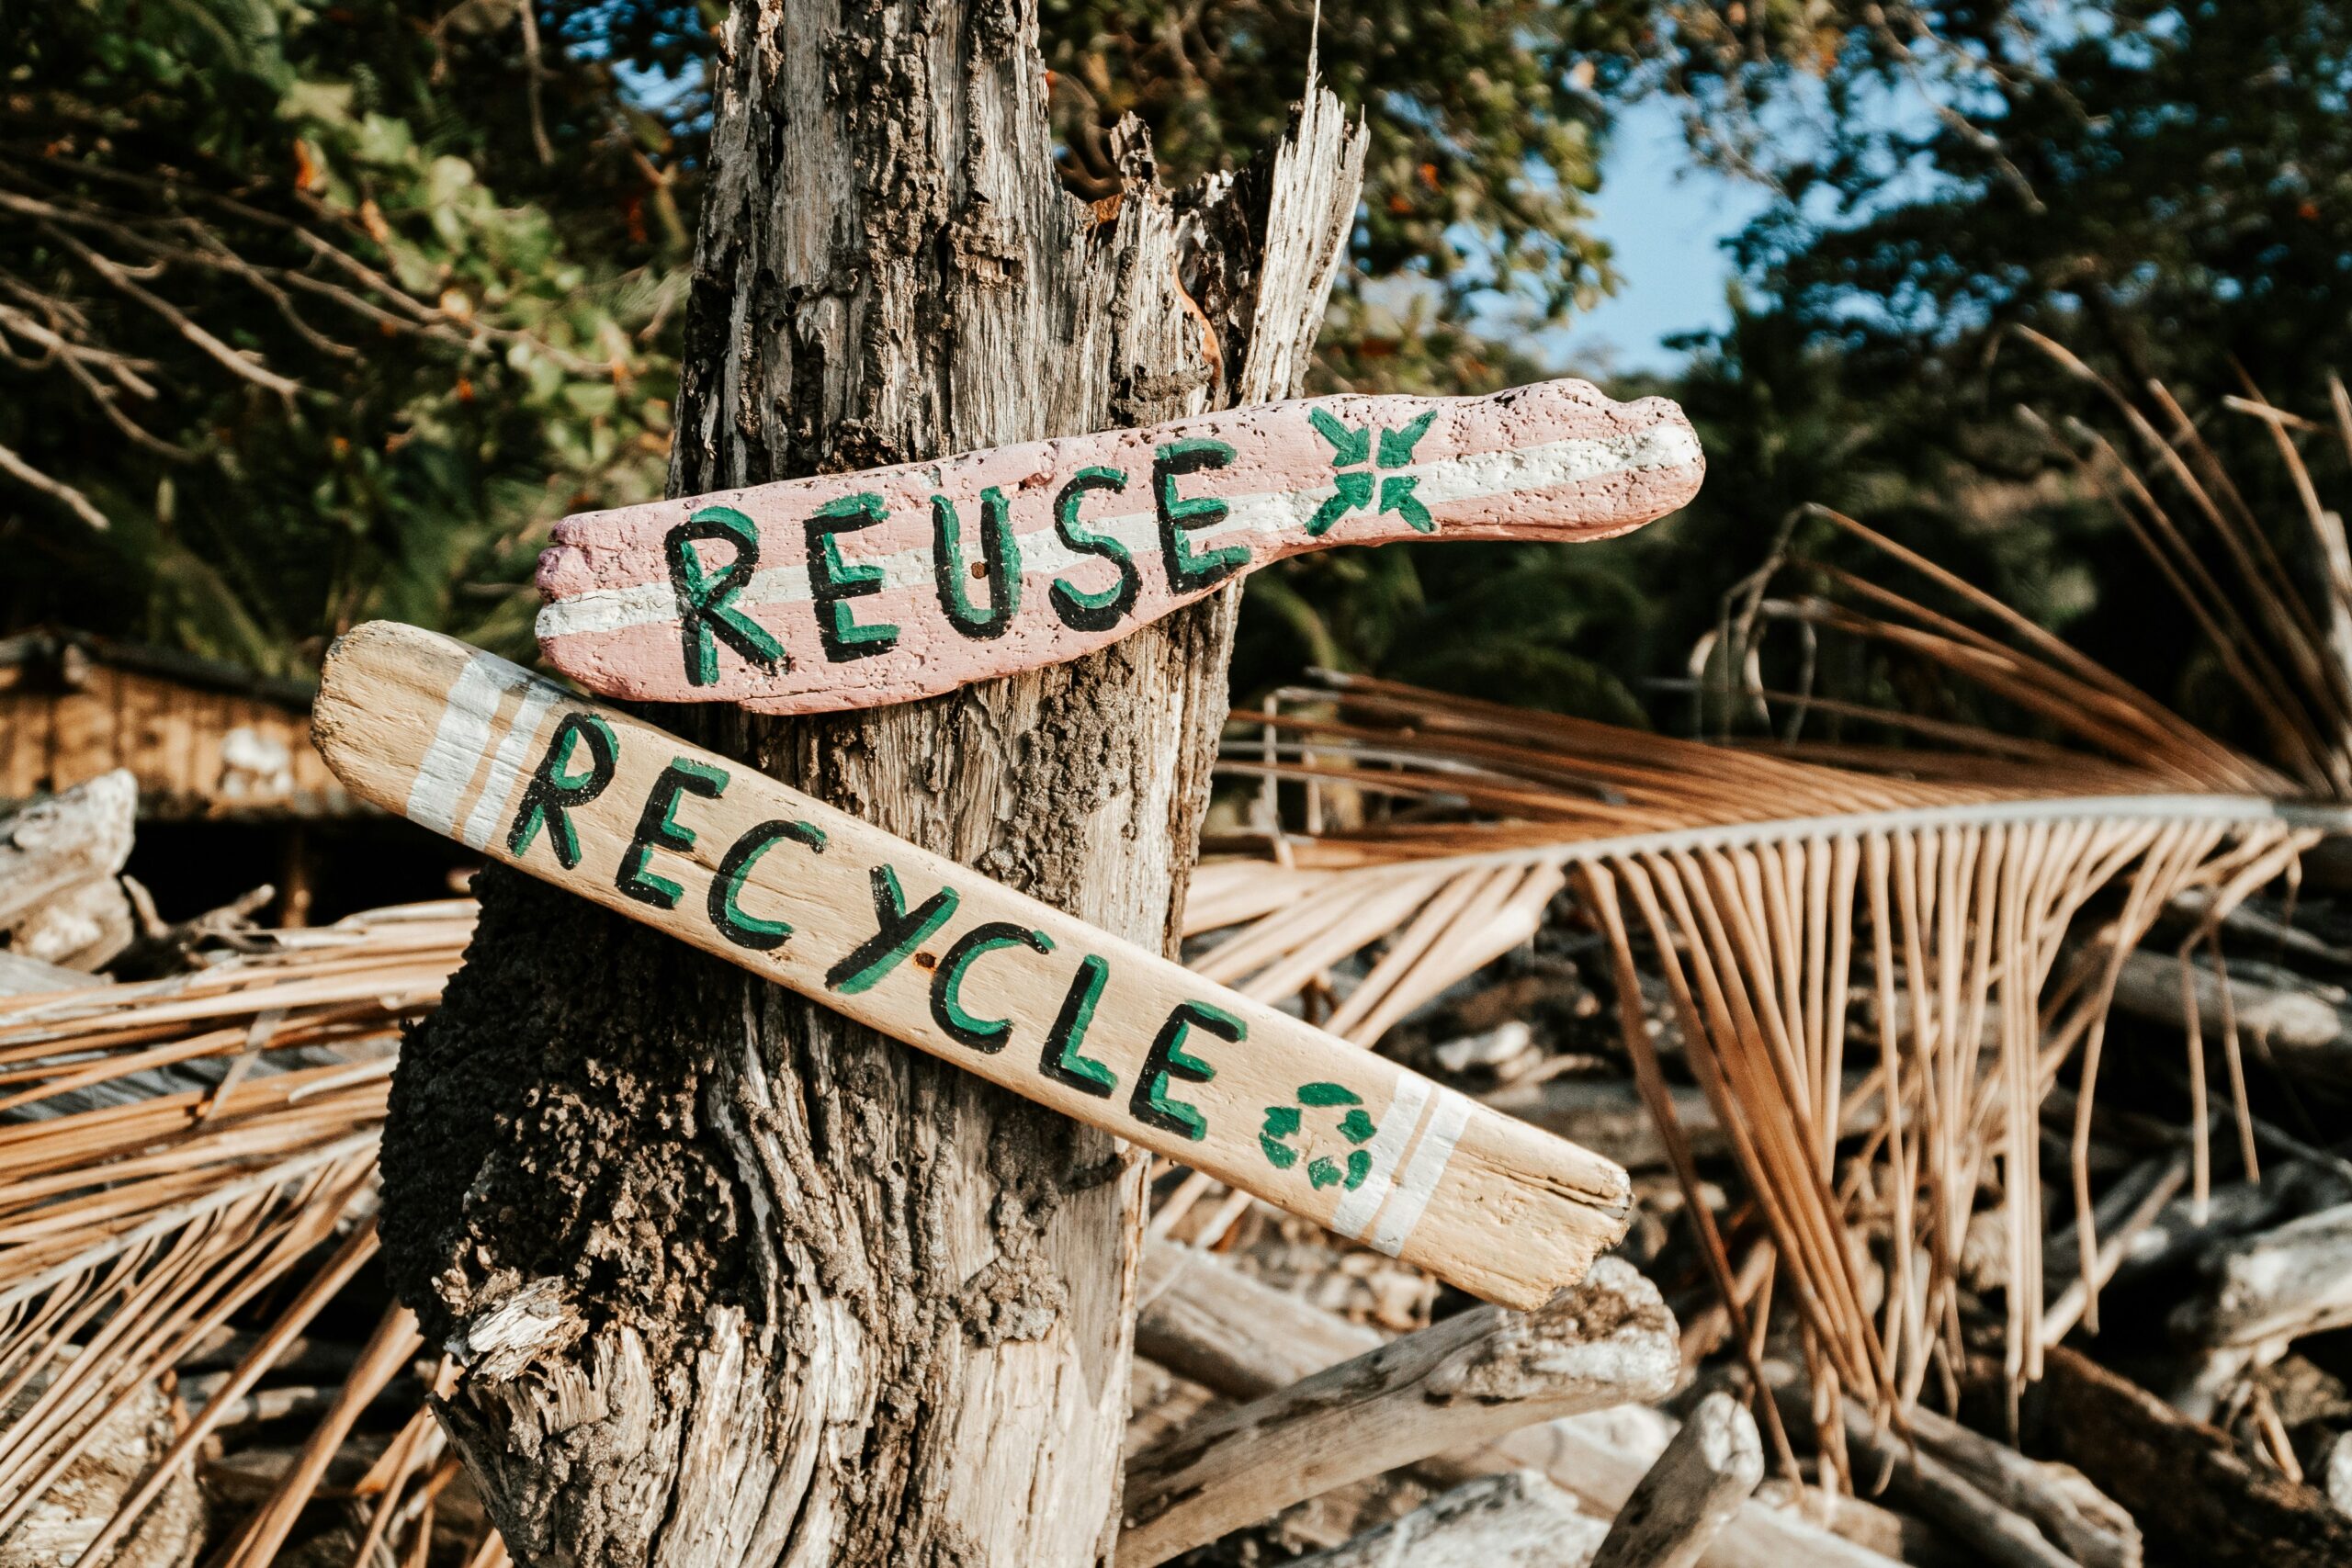 A tree stump in a forest with two wooden signs on it - one that reads "reuse" and one that reads "recycle."